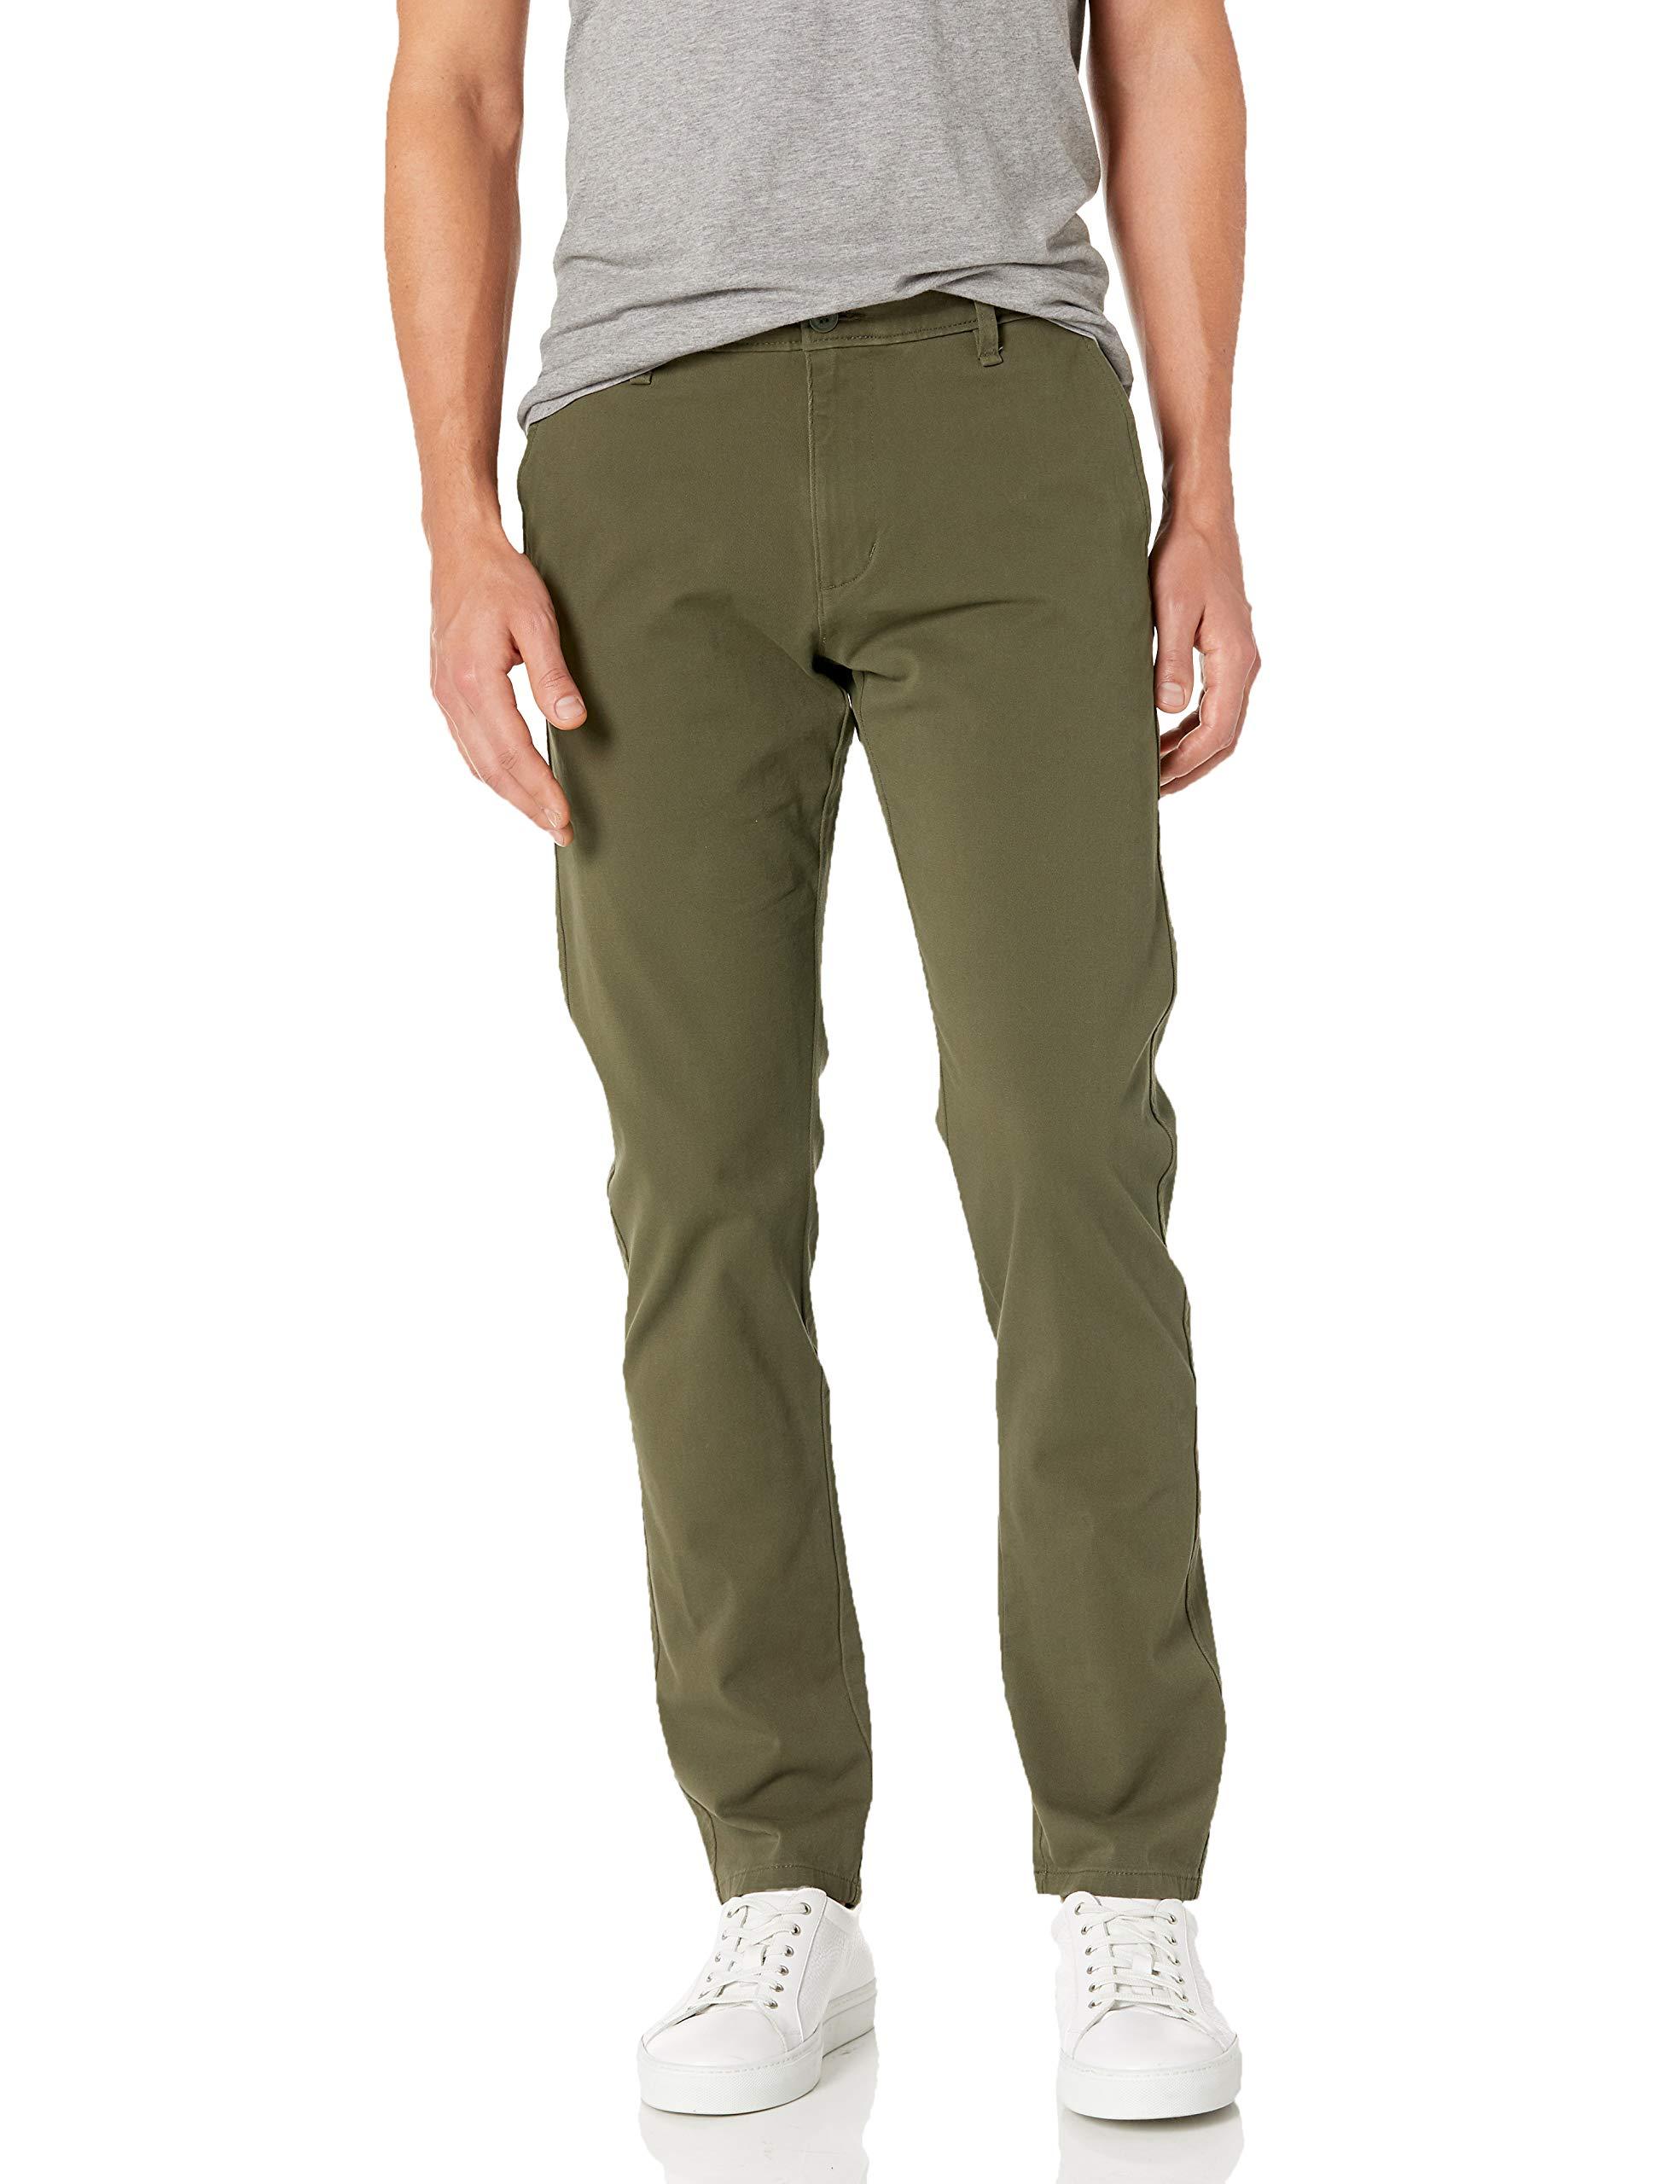 Dockers Slim Fit Ultimate Chino Pants in Army Olive (Green) for Men ...